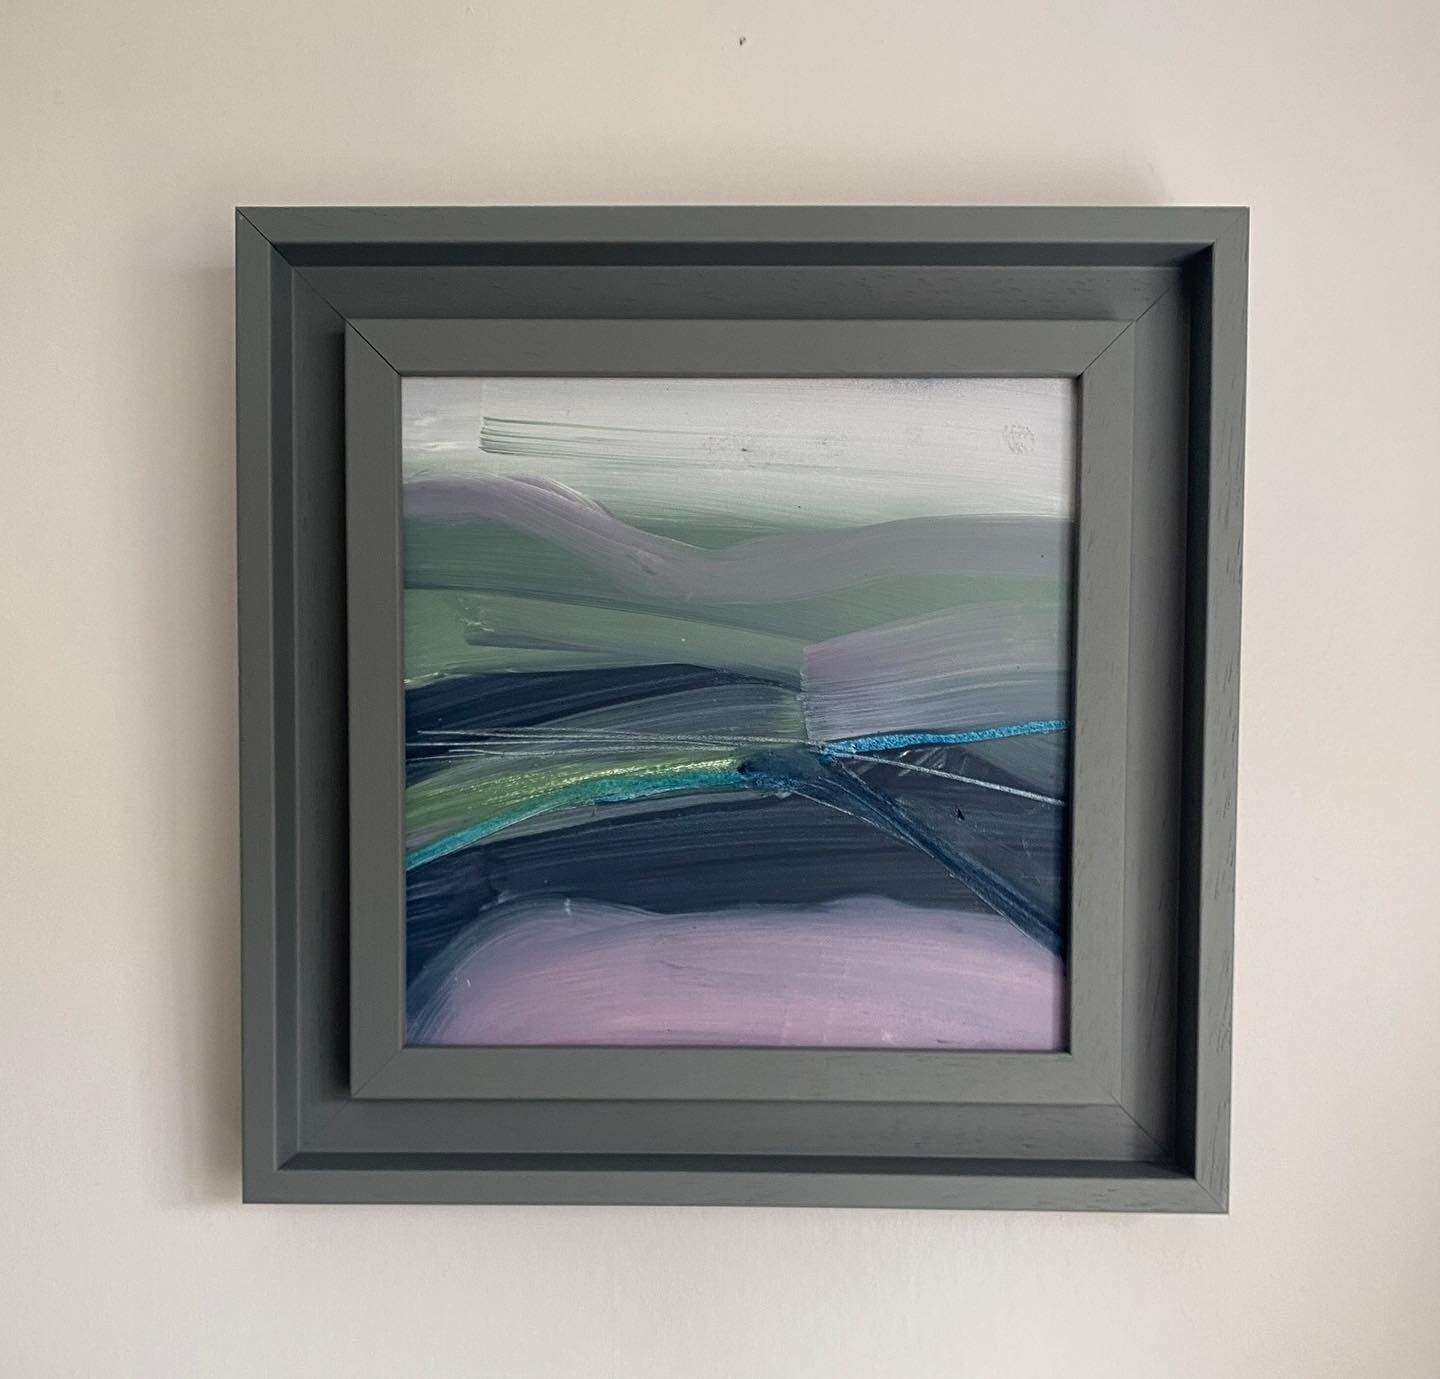 New grey frames for these landscape panels - I have always preferred white to frame my work and most of the time I still do but sometimes it&rsquo;s good to have a change! 

#sussexartist 
#sussexartists 
#inspiredbythelandscape 
#oilonpanel 
#contem